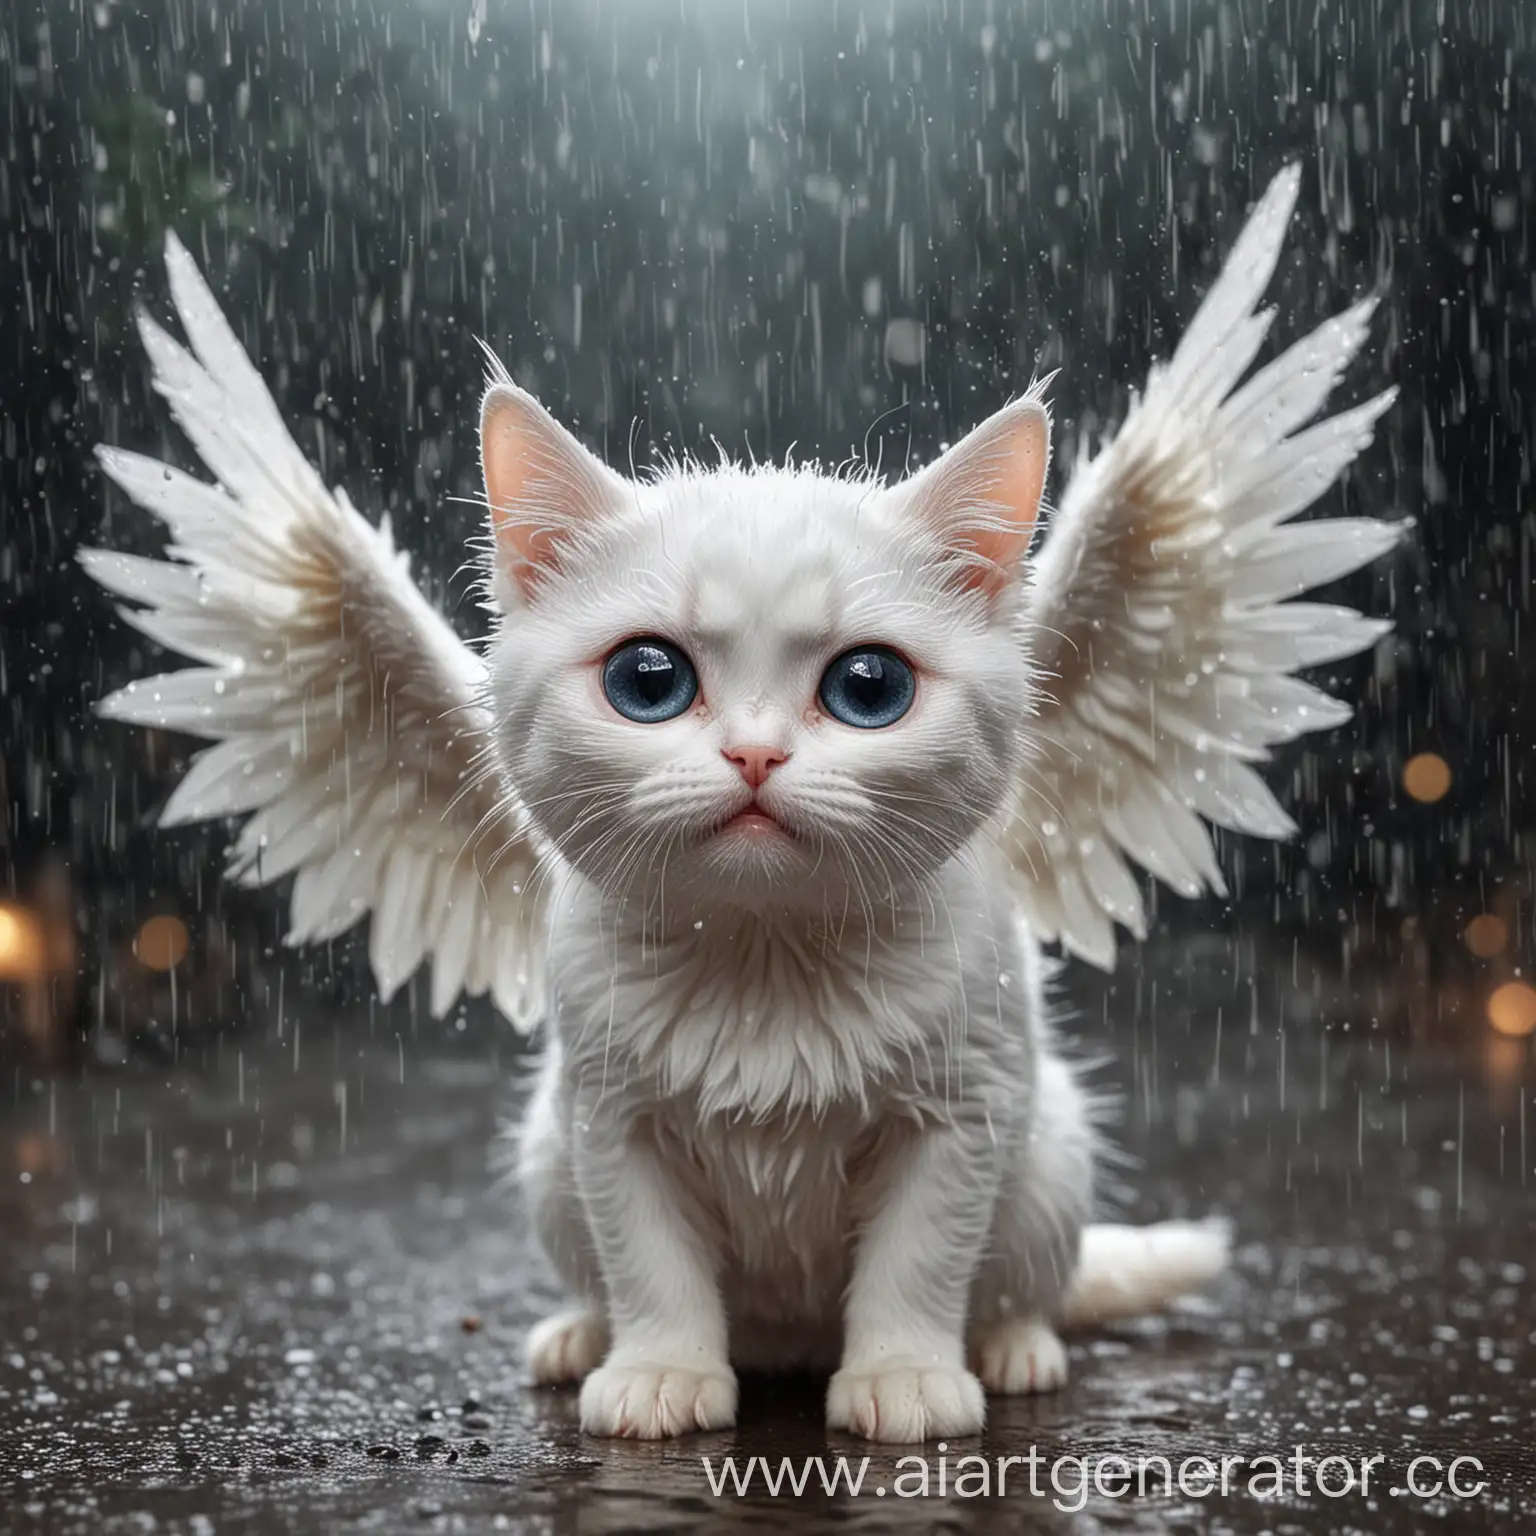 Crying-White-Cat-with-Wings-in-Rain-Emotional-Feline-Portrait